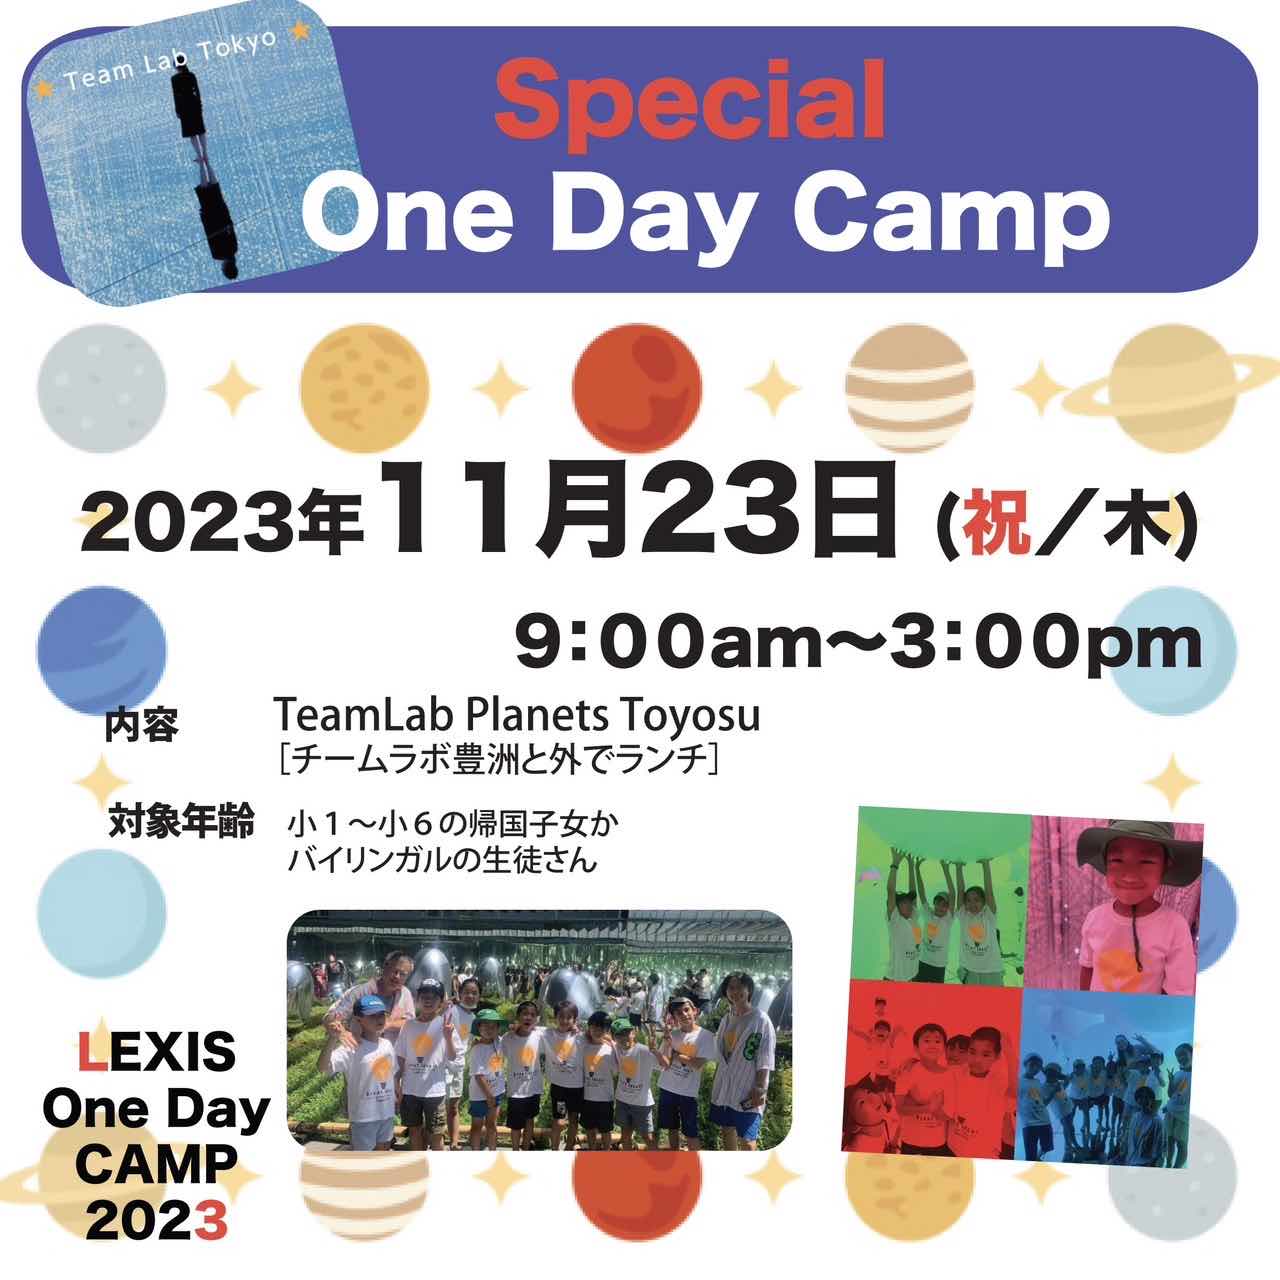 Lexis　Planets!　吉祥寺英会話　Day　11月23日　Team　Camp　Lab　One　And　帰国子女英語教室『レクシス』